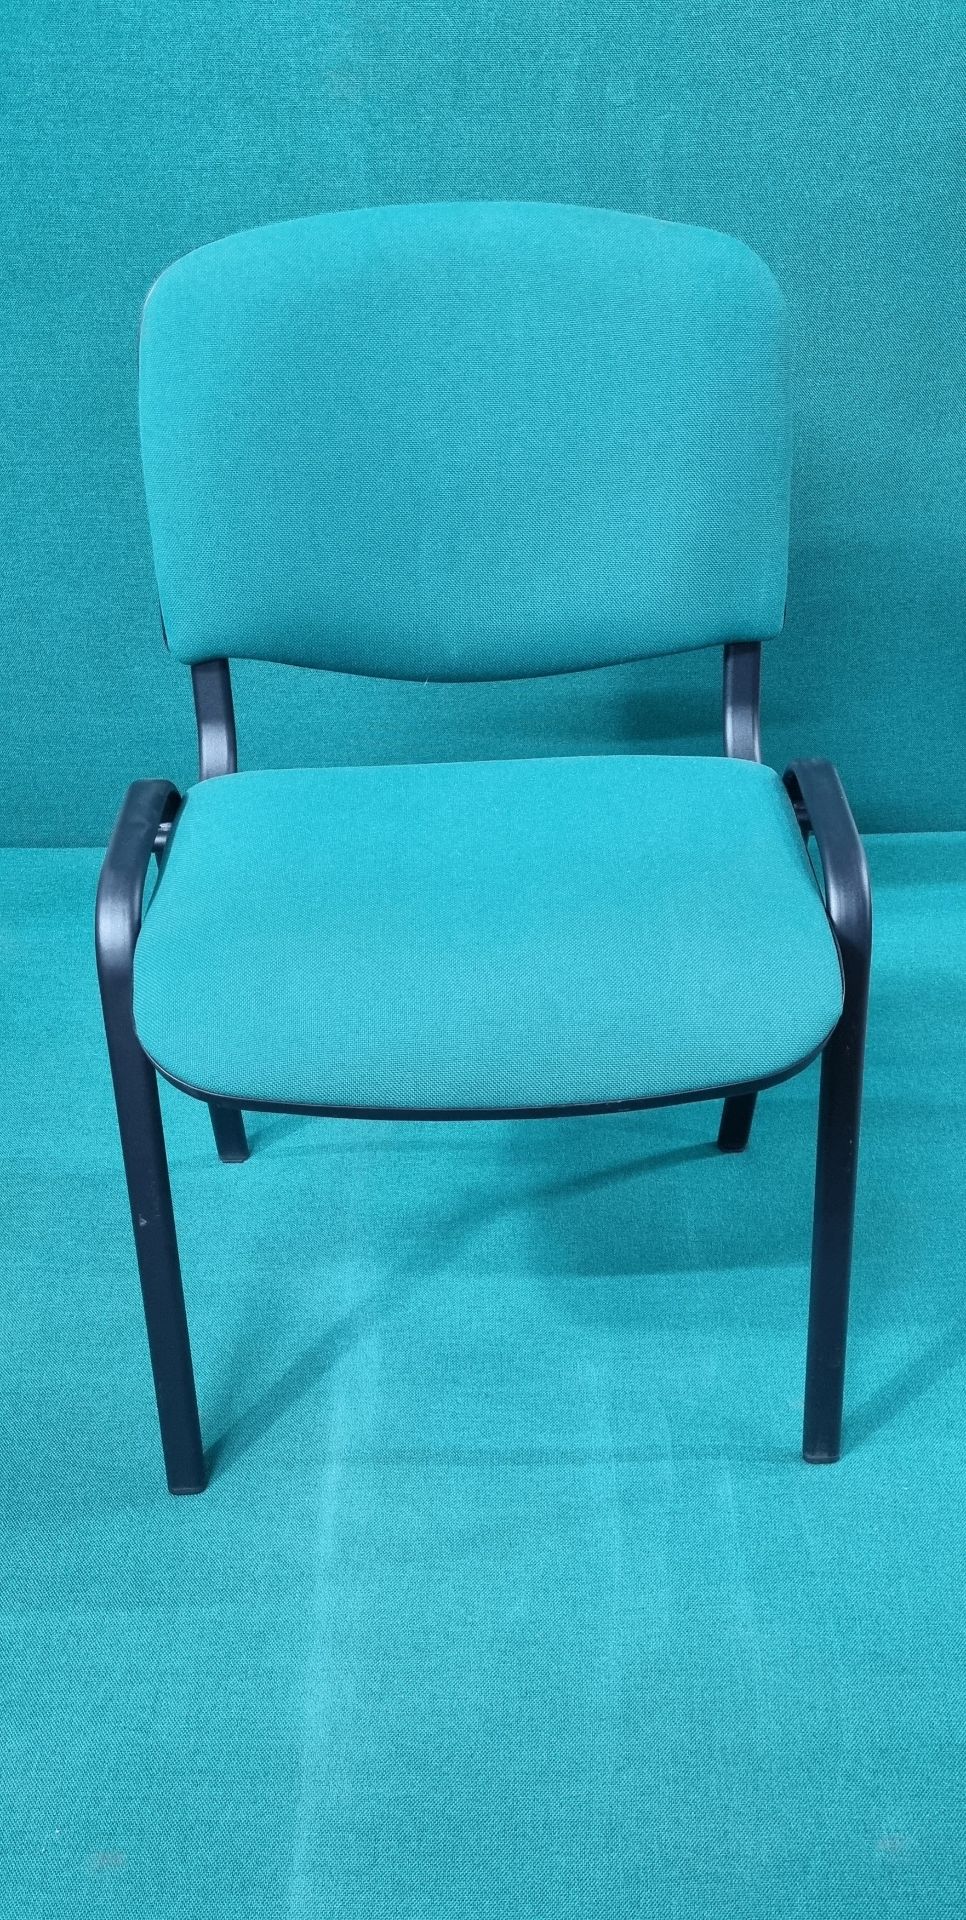 4 x Green Fabric Office Chairs - Image 2 of 7